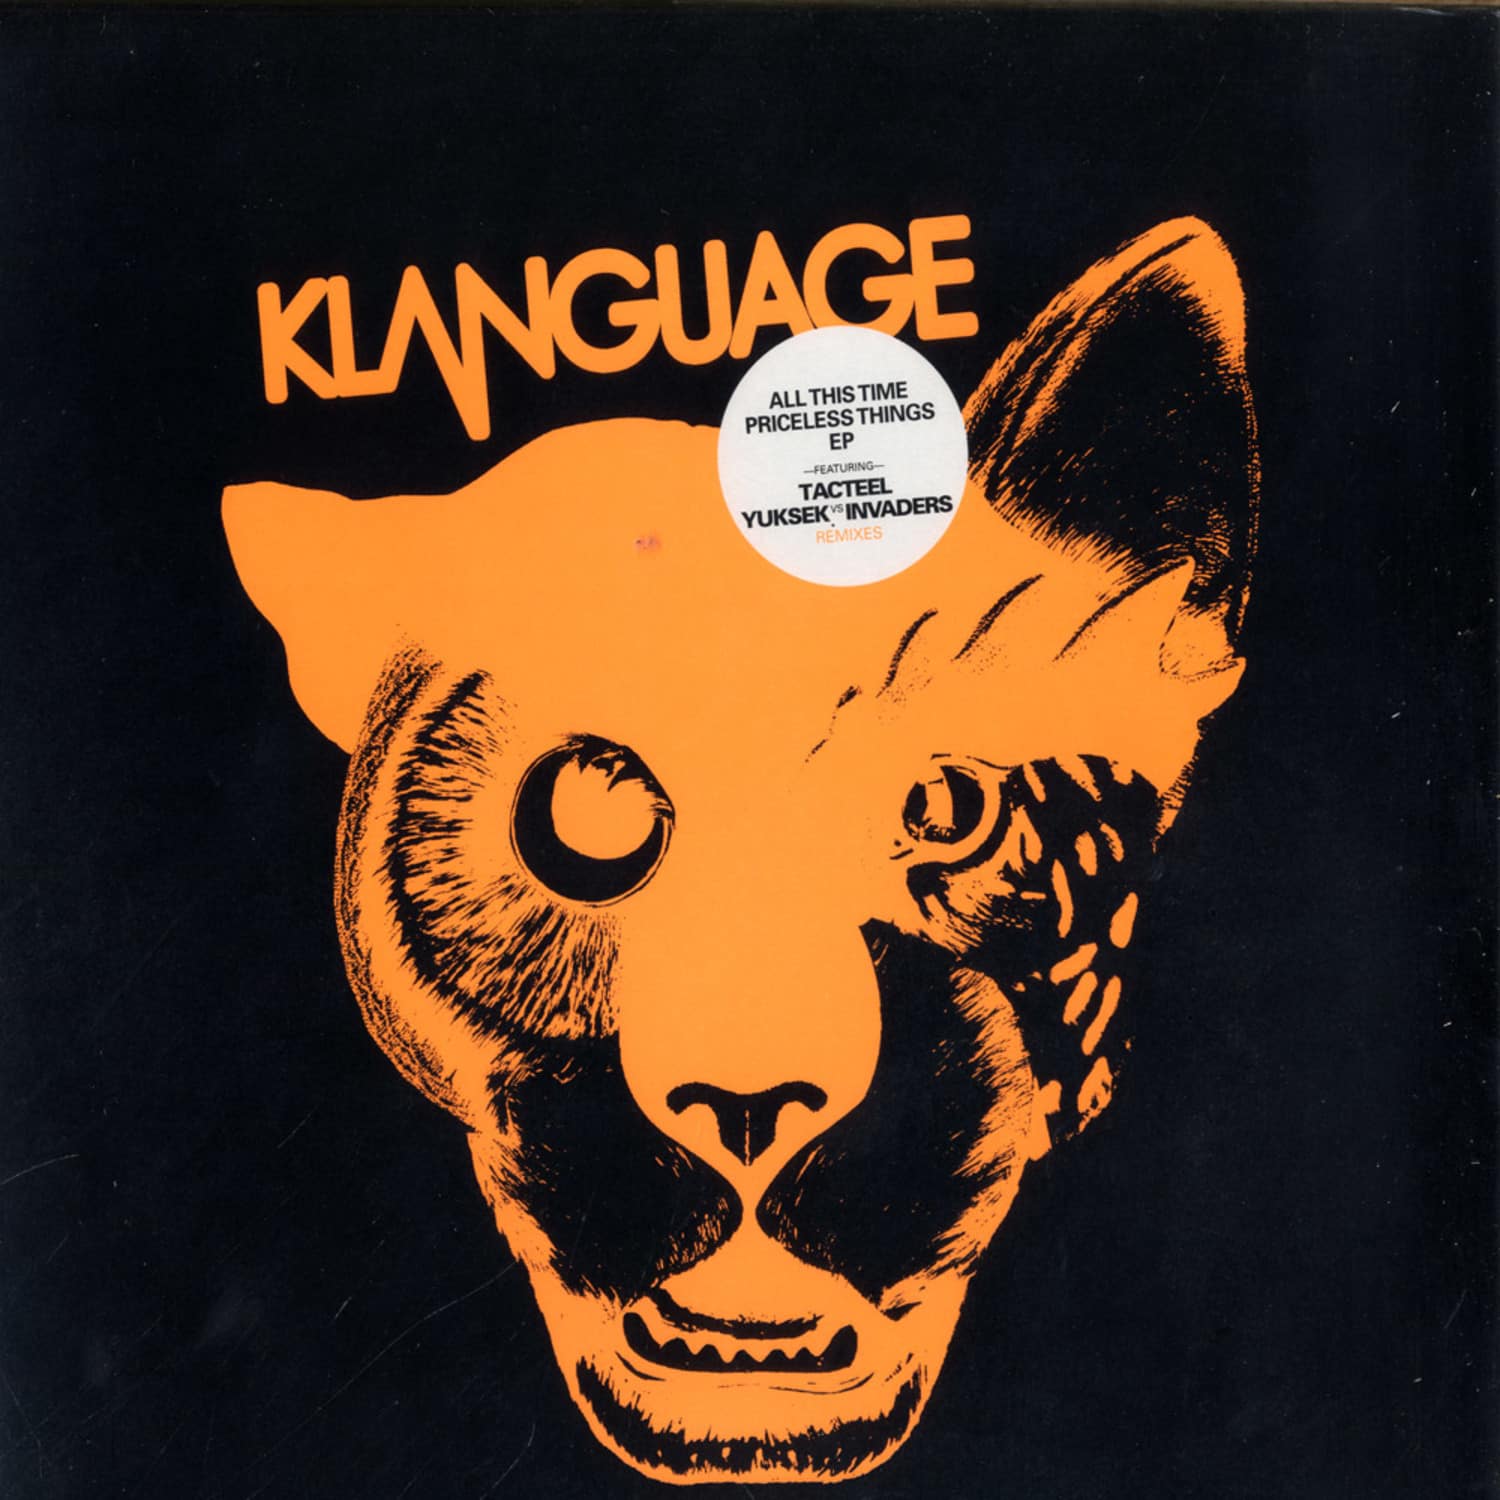 Klanguage - ALL THIS TIME / PRICELESS THINGS EP